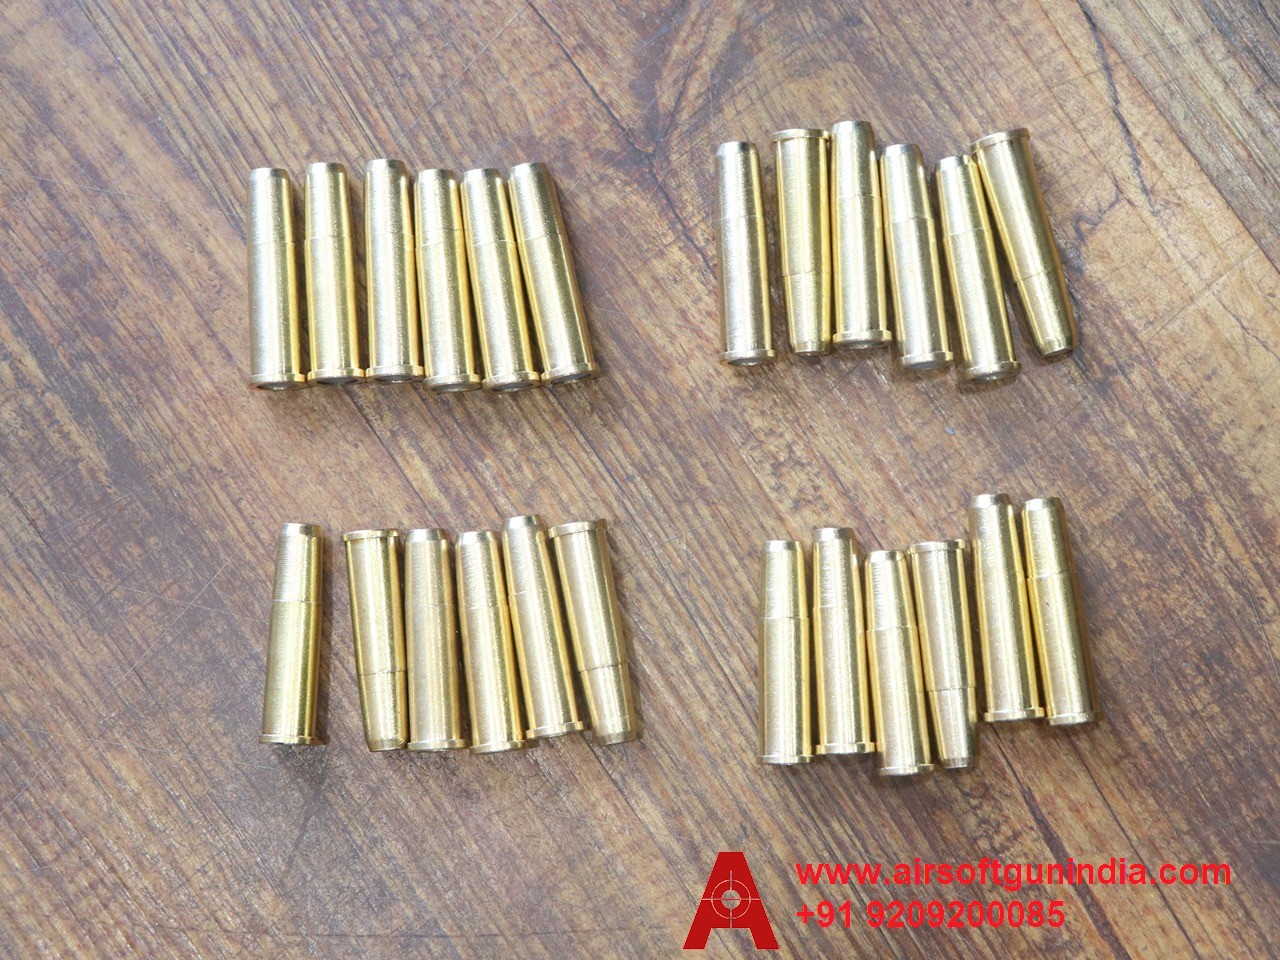 Pellet Shells For Dan Wesson .177 Caliber Co2 Revolvers, 24 Piece By Airsoft Gun India